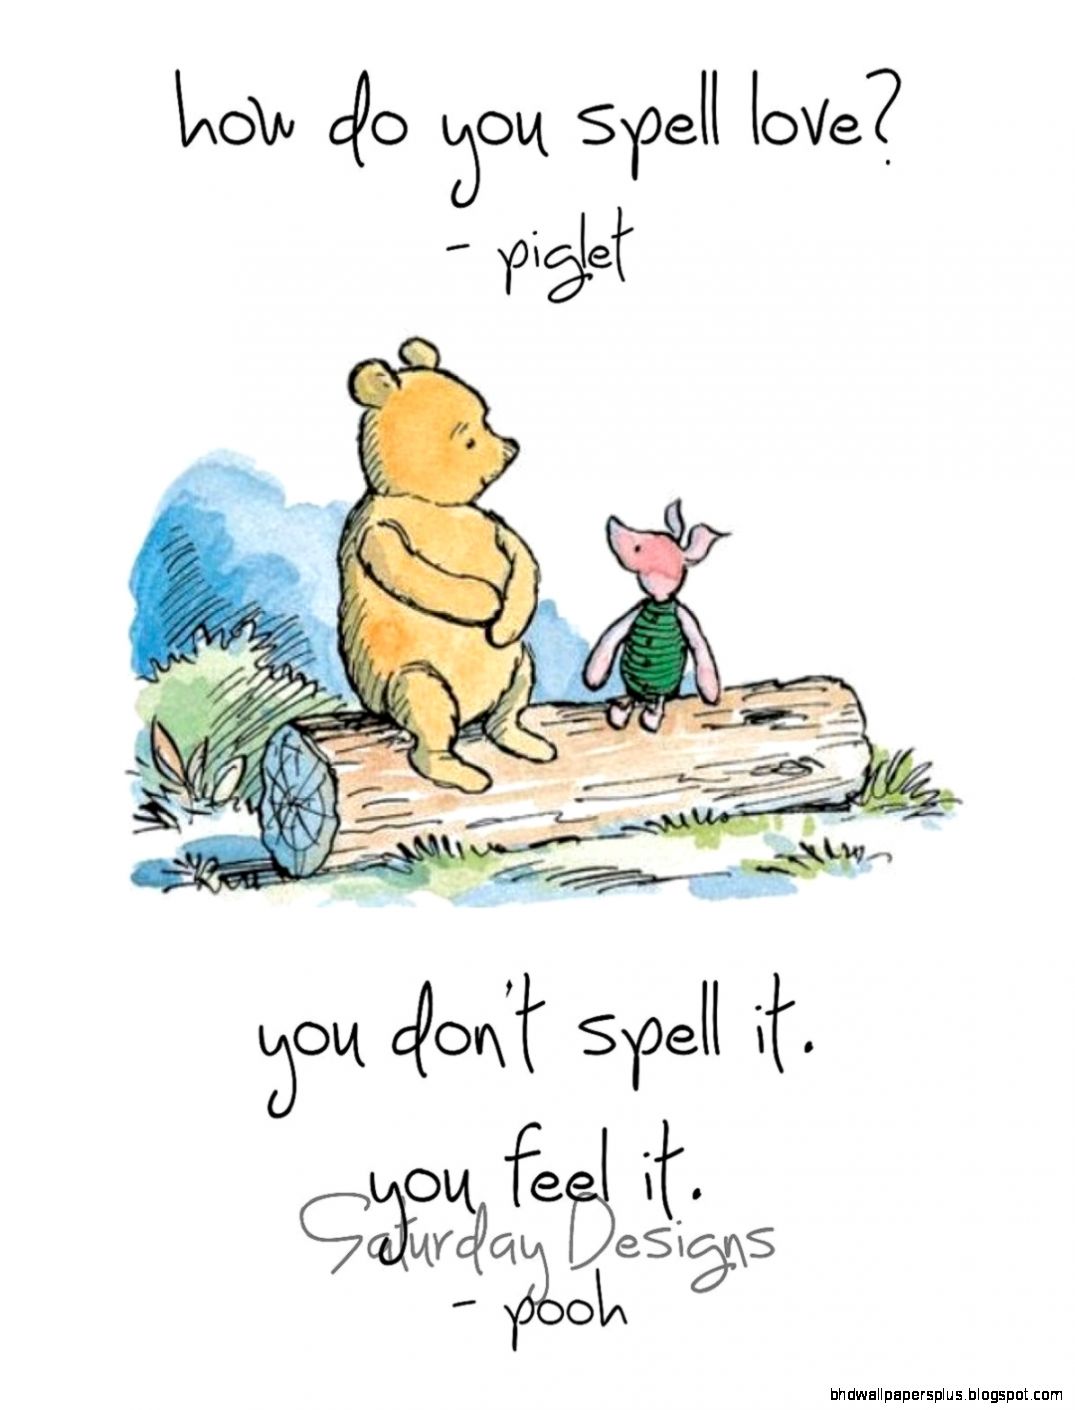 Friendship Quotes Winnie The Pooh | HD Wallpapers Plus